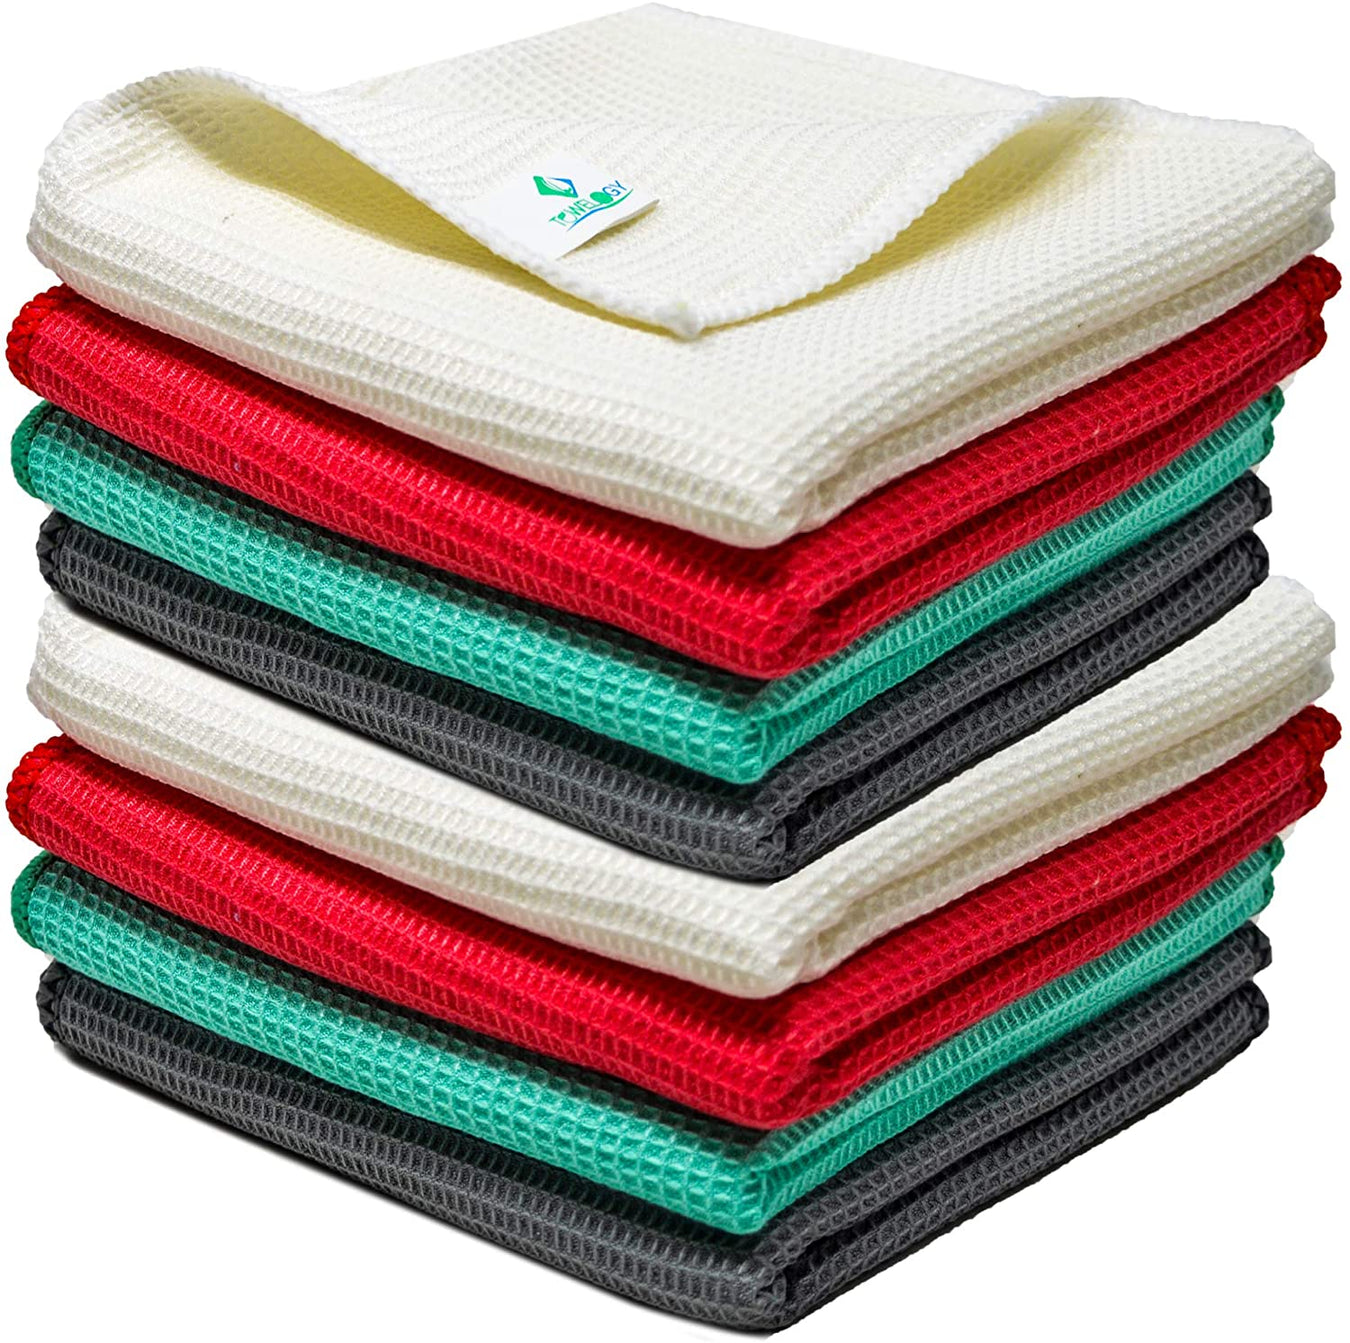 Wholesale Towels Collection